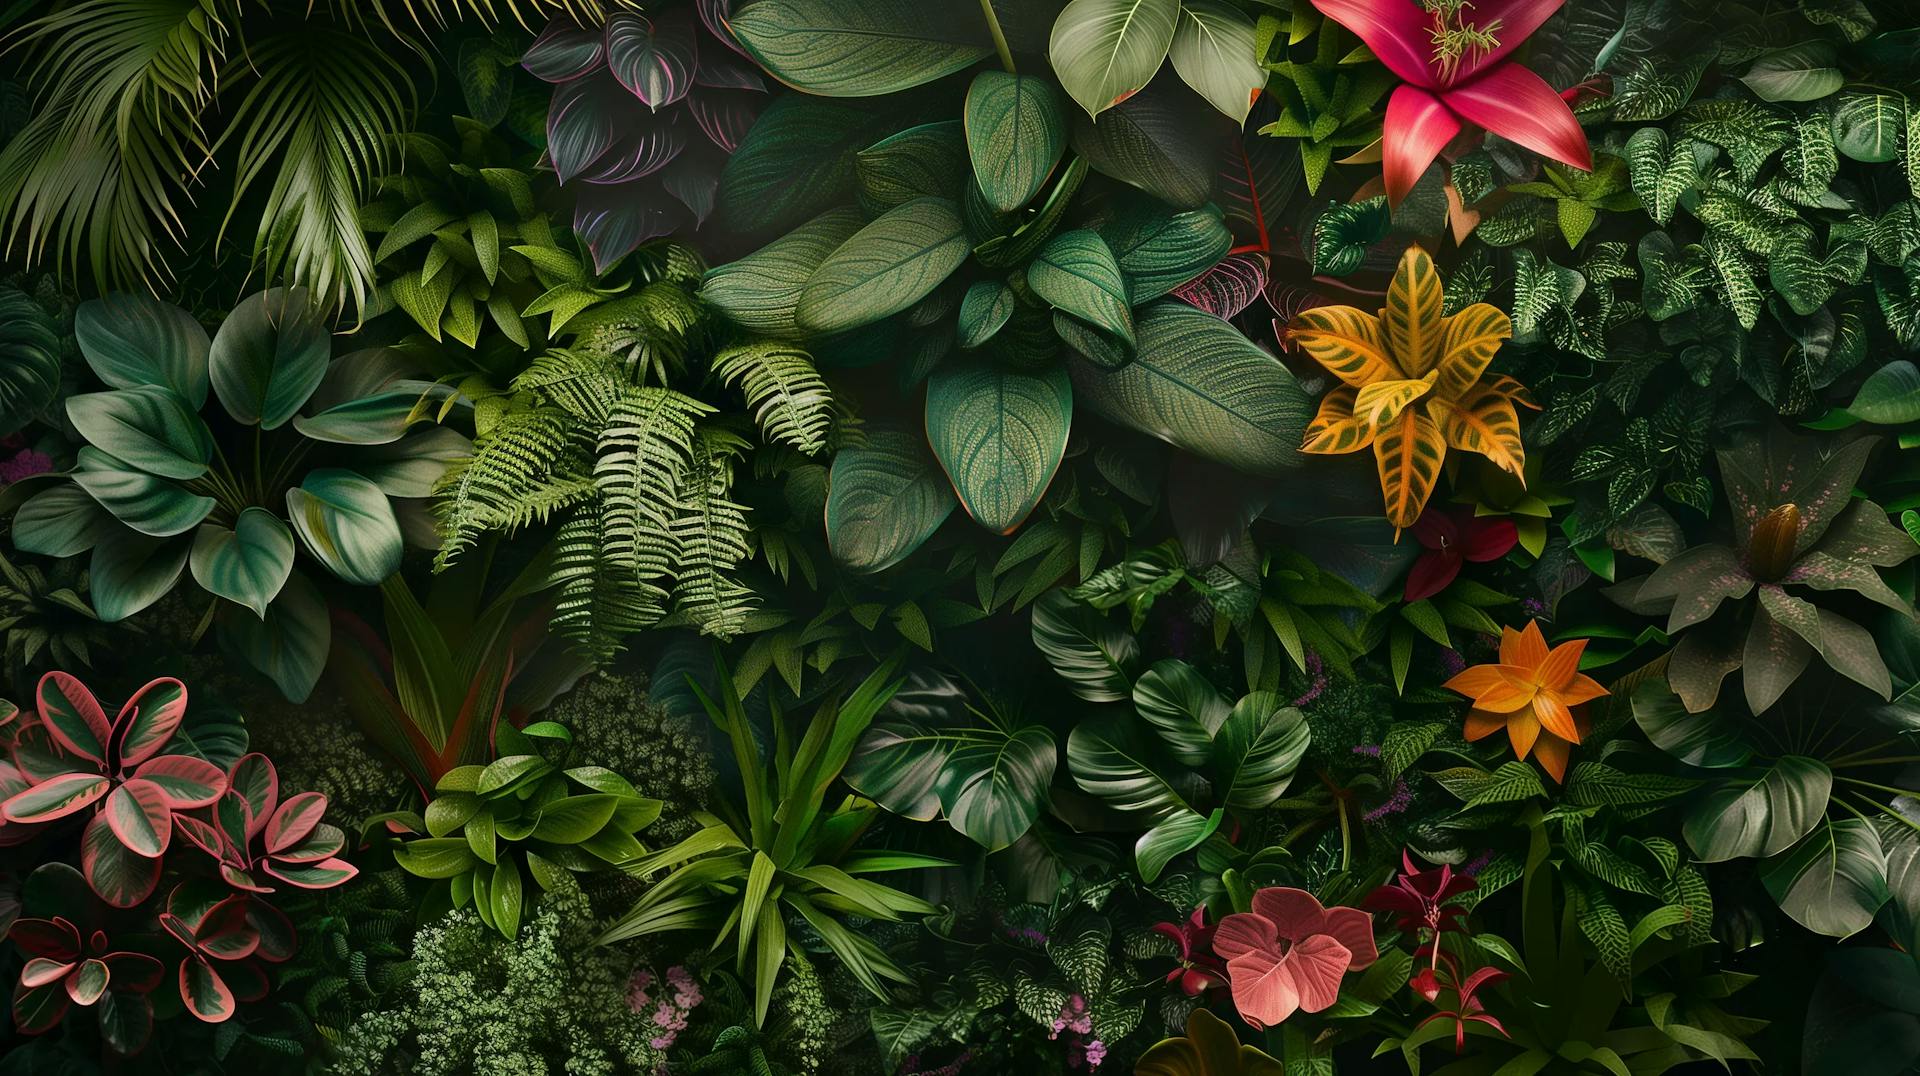 Lush tropical foliage background with a variety of vibrant green leaves and colorful flowers.